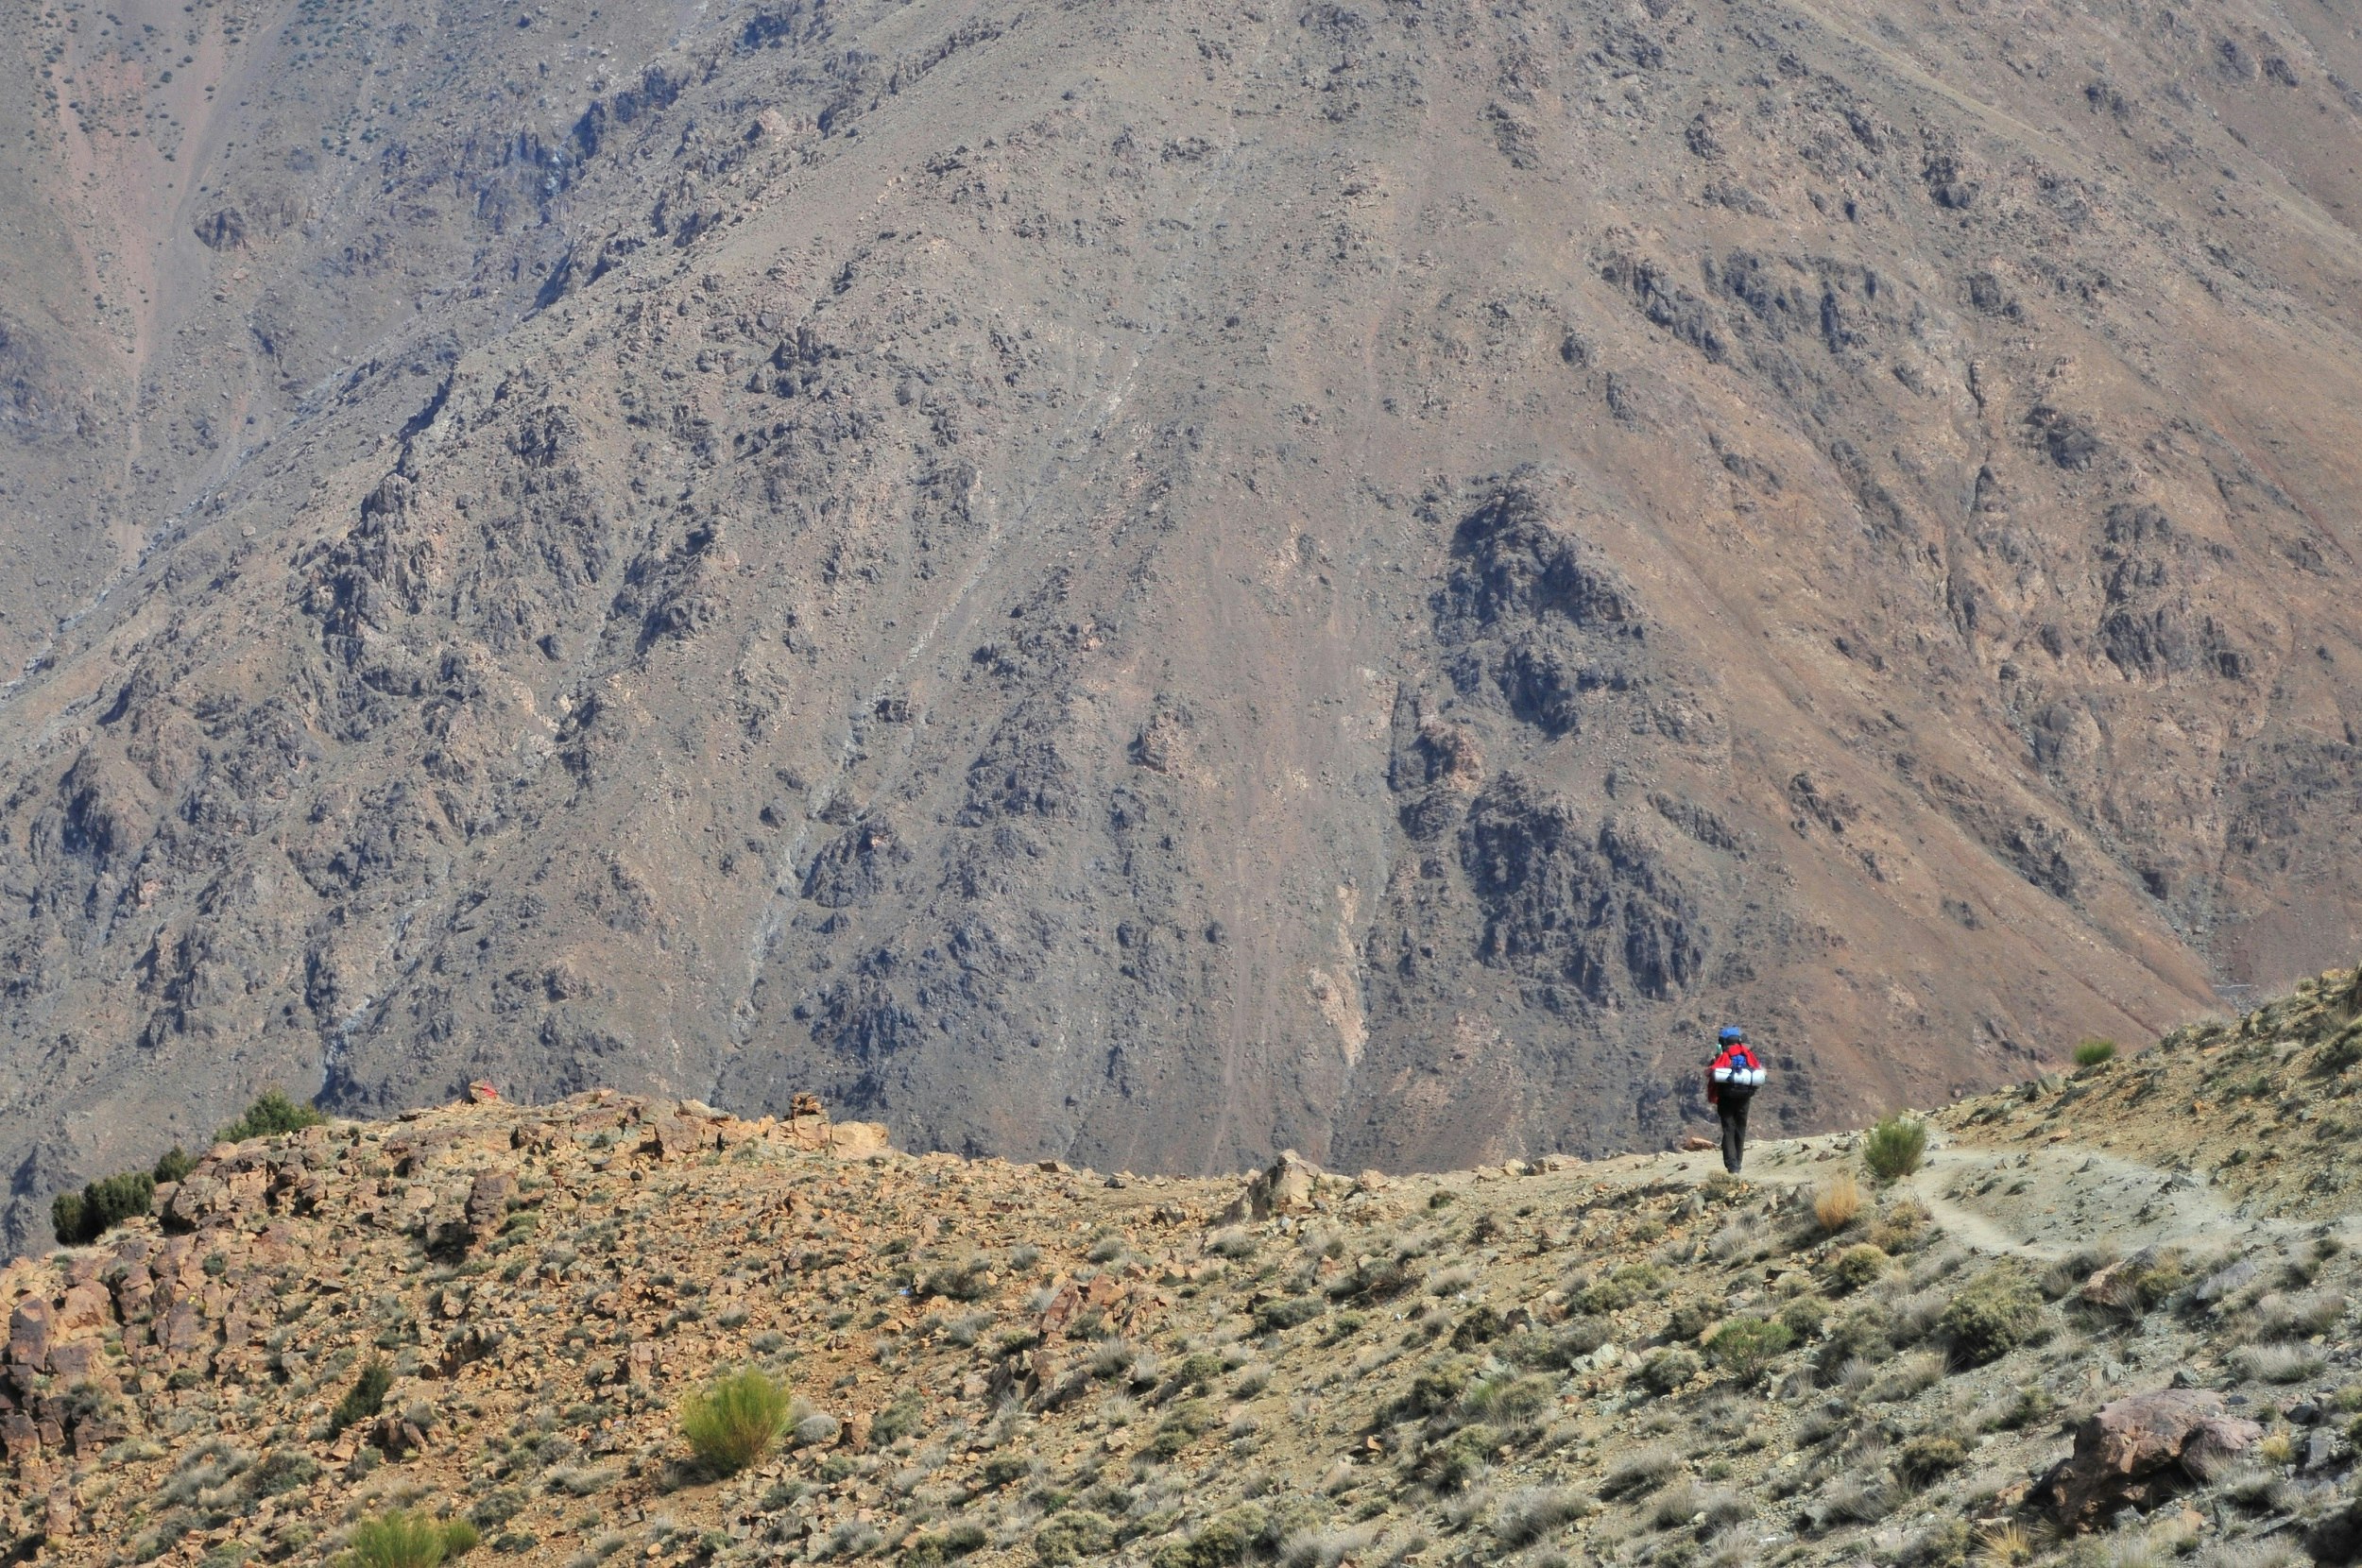 A lone hiker on a ridge who is dwarfed by the hulking mass of Jebel Toubkal in the background.